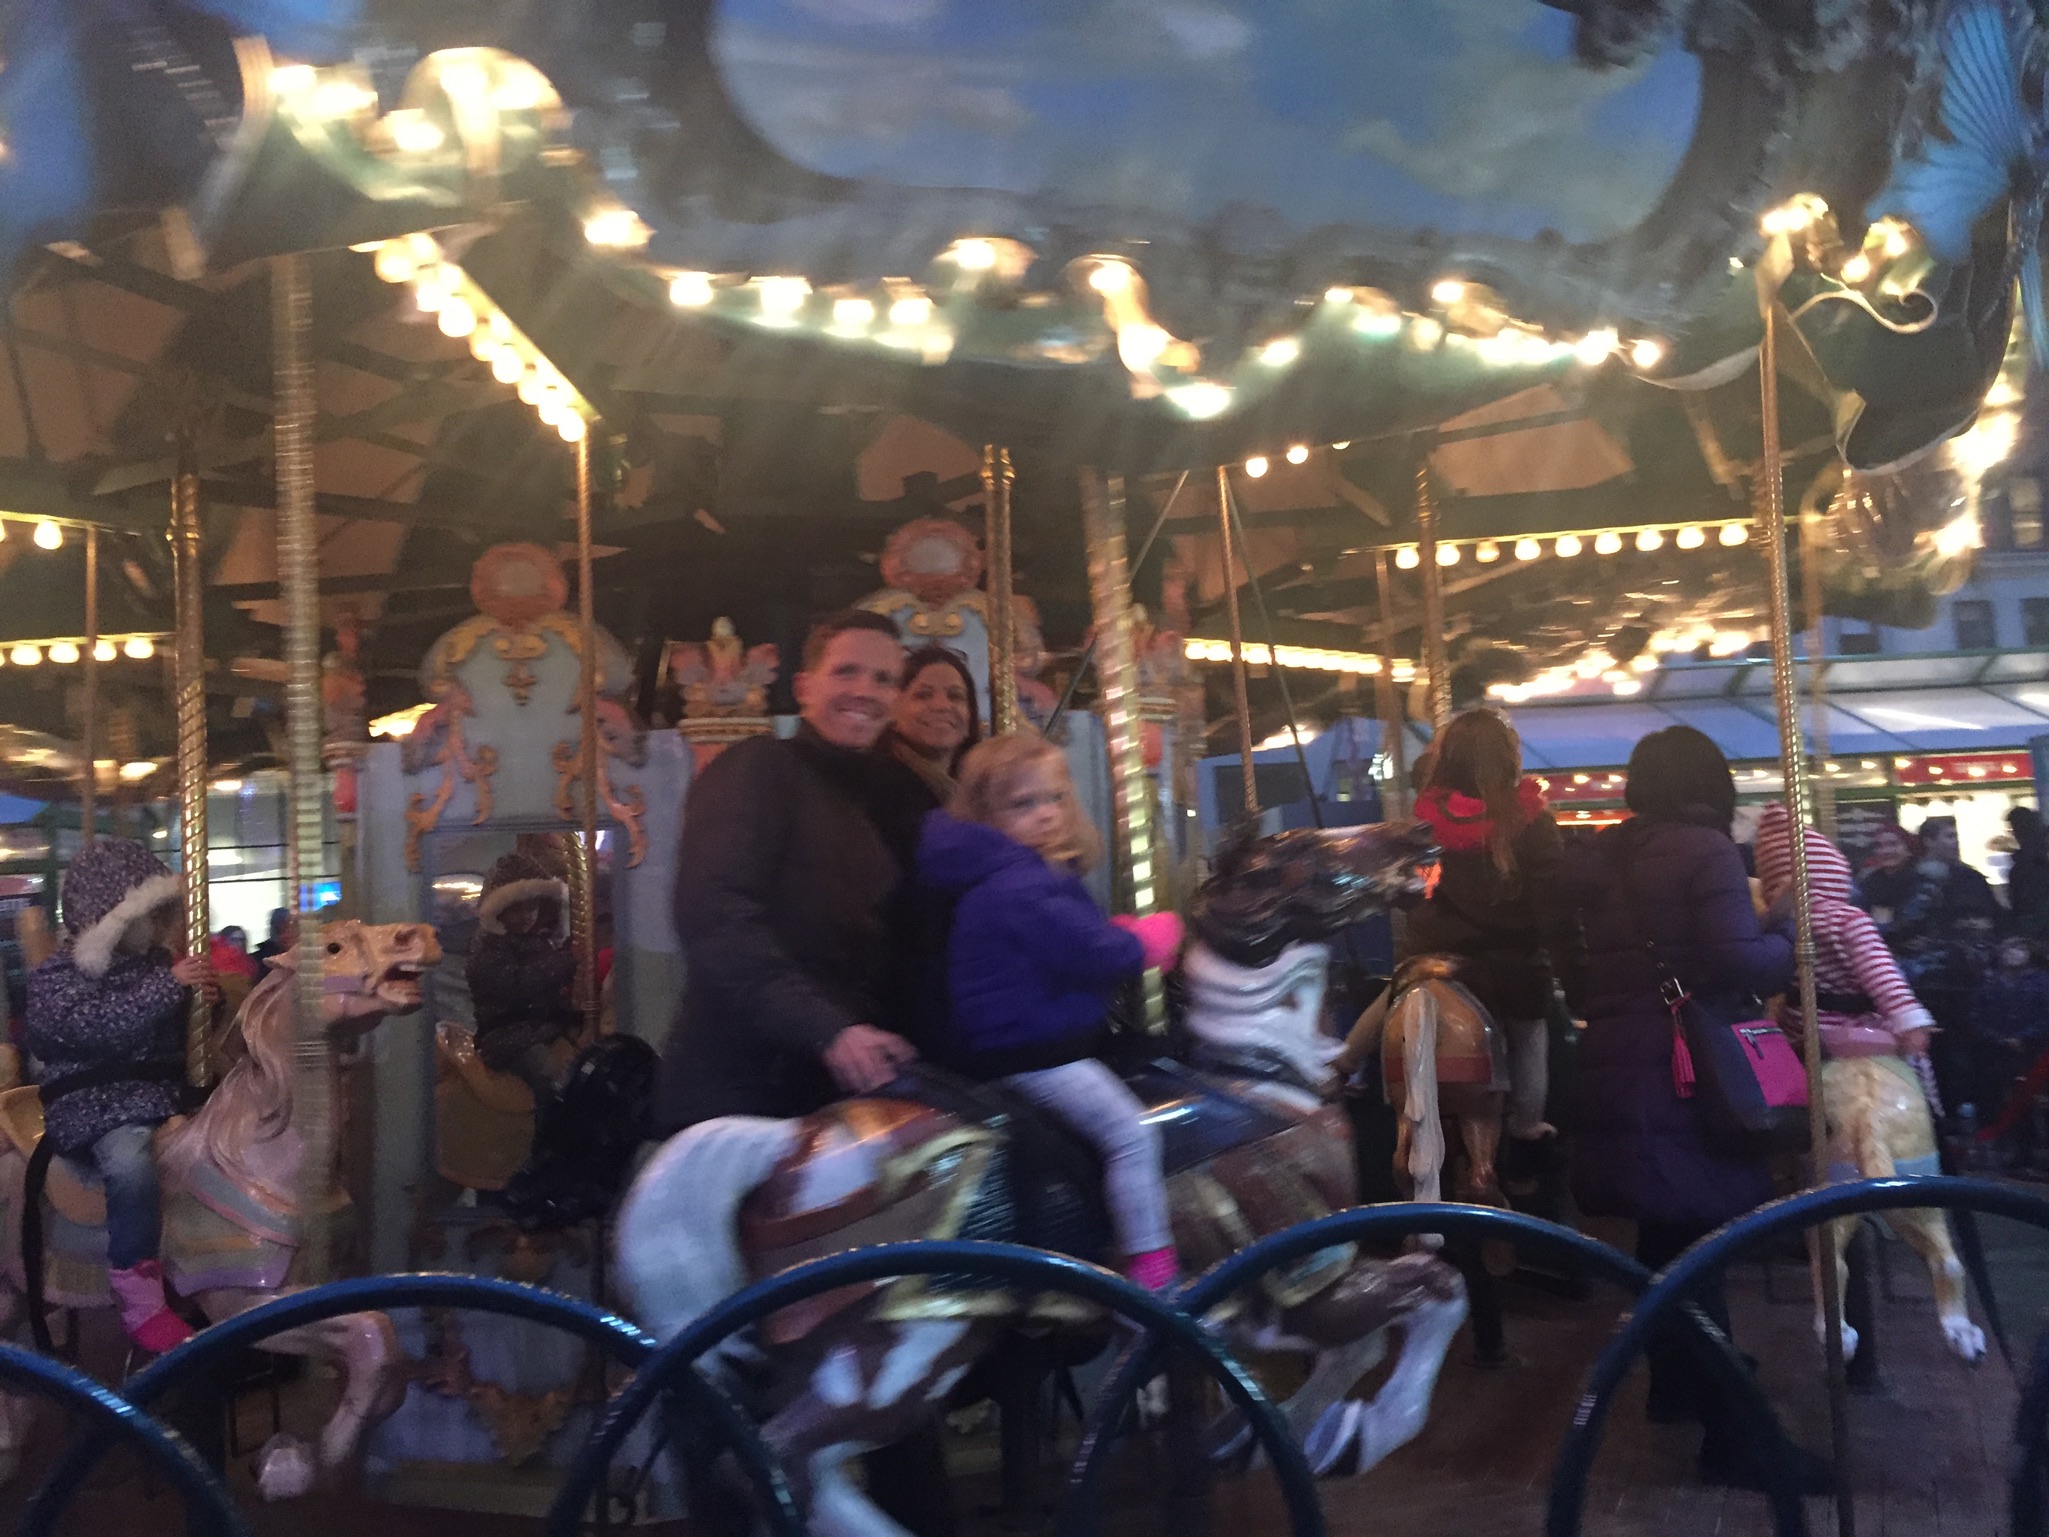  Abuela, Rob and Lucie on the carousel in Bryant Park. 